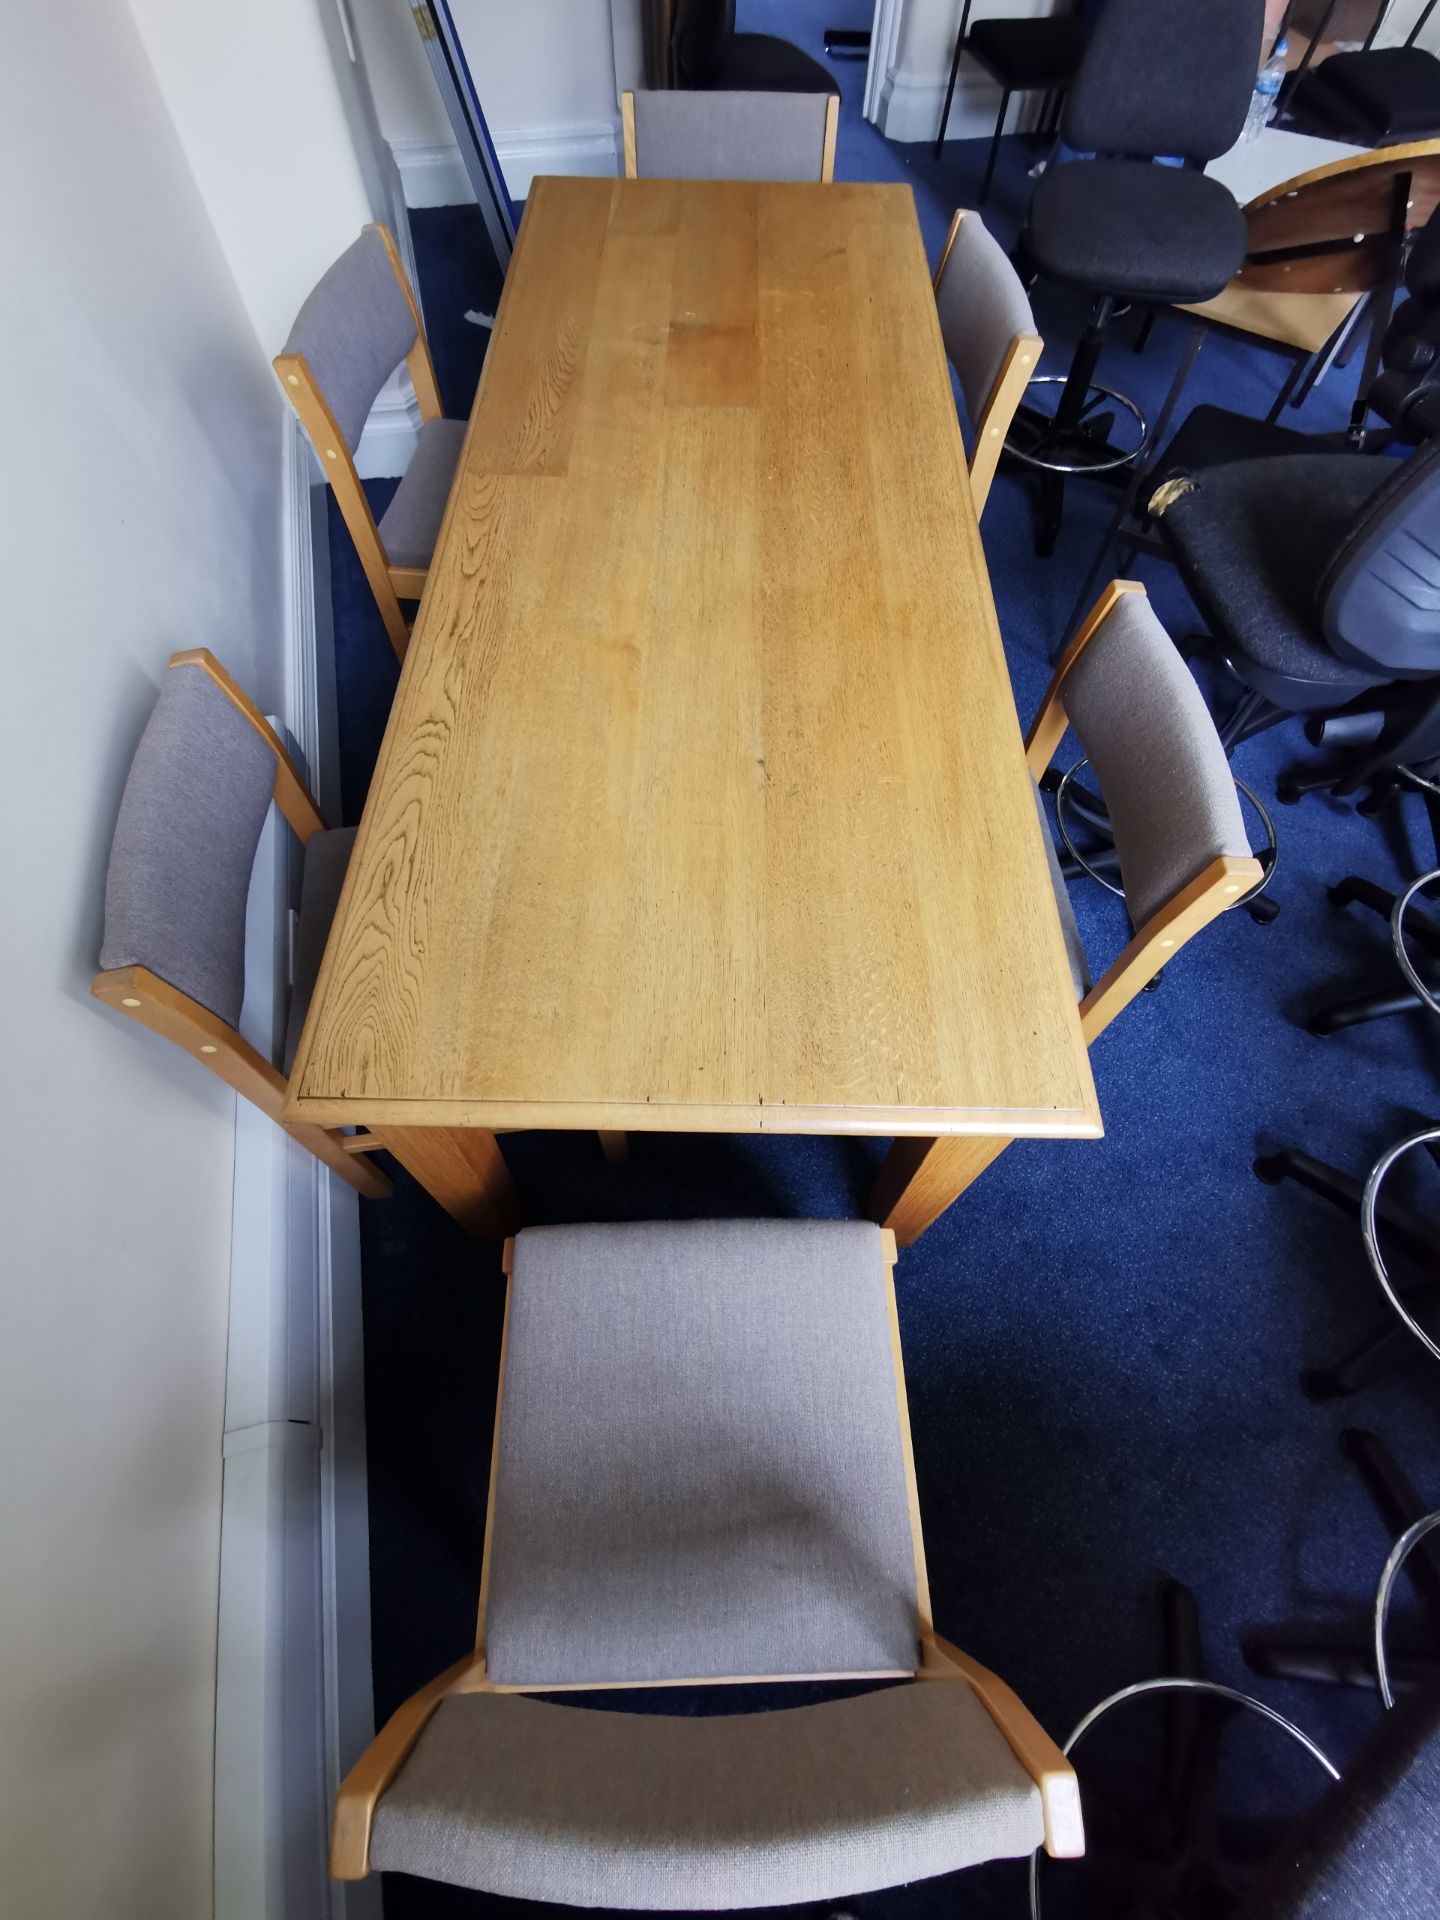 8ft Board room table and six chairs